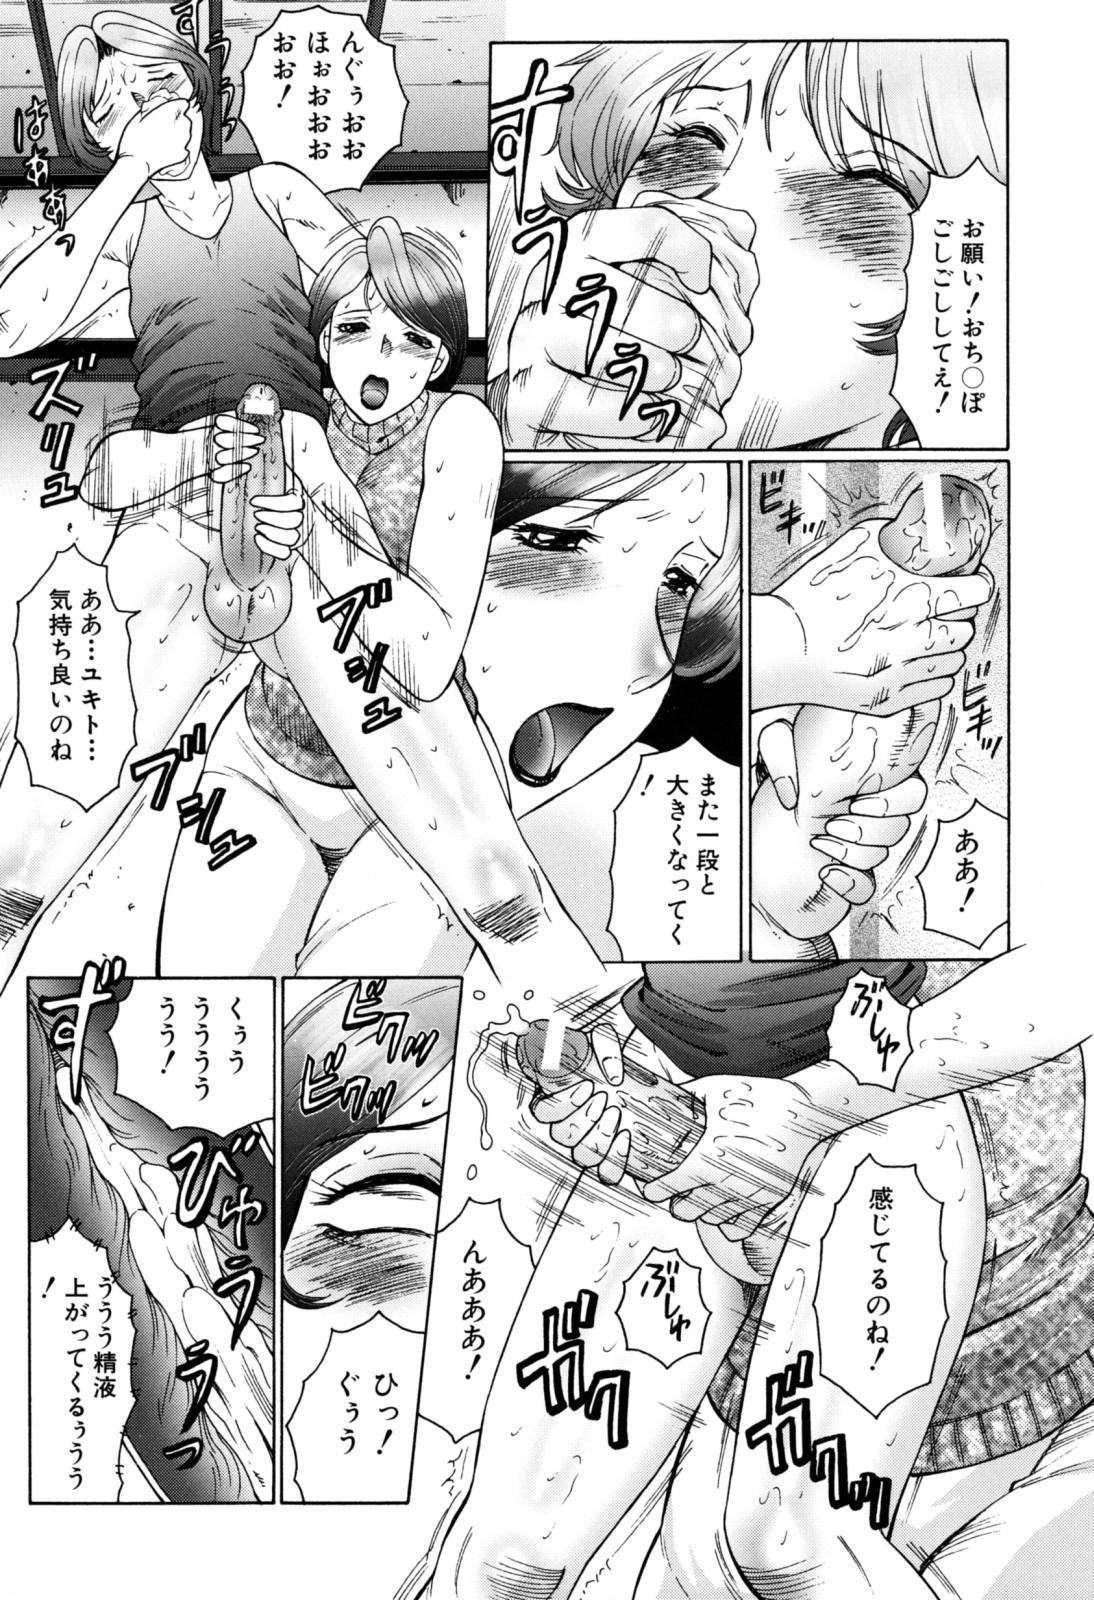 Boshino Toriko - The Captive of Mother and the Son 28